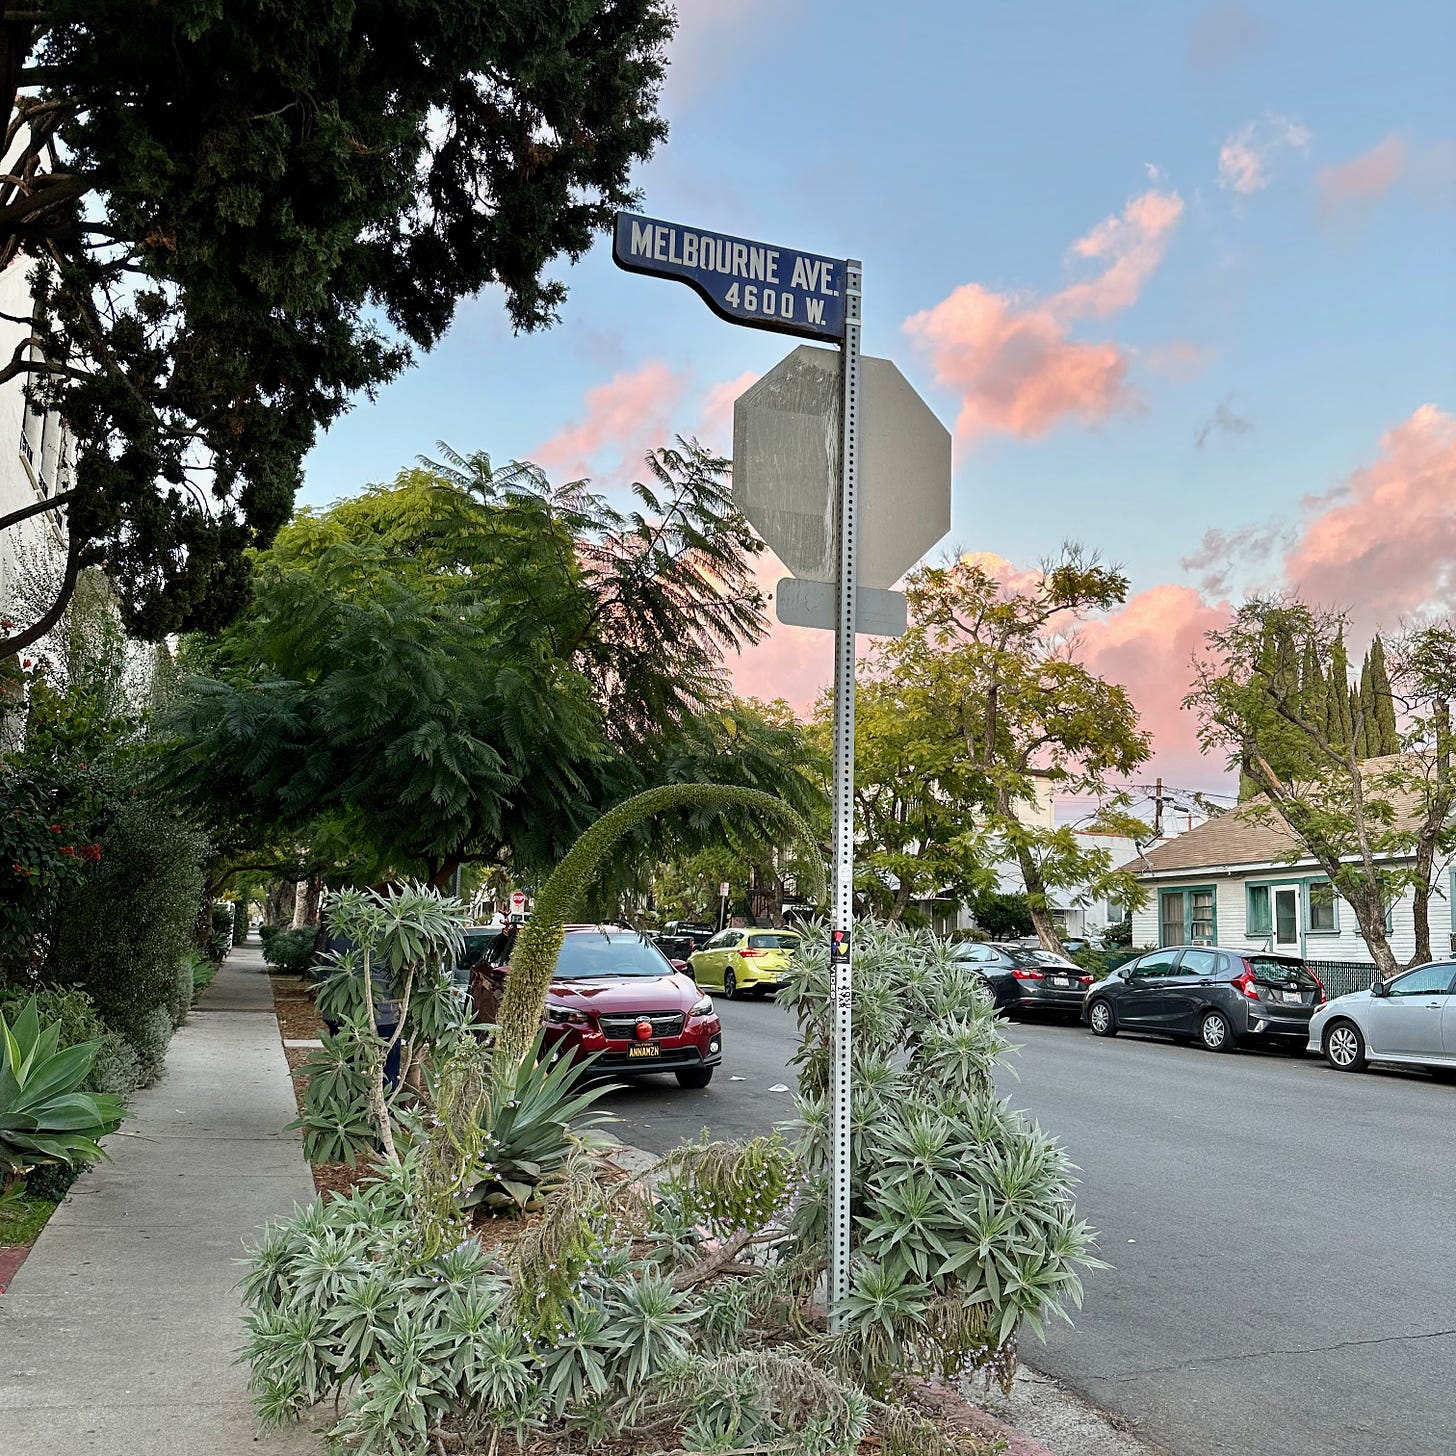 A neighborhood street with sidewalk, cars parked, plants, a street sign, and a beautiful sky that's blue with pink clouds.